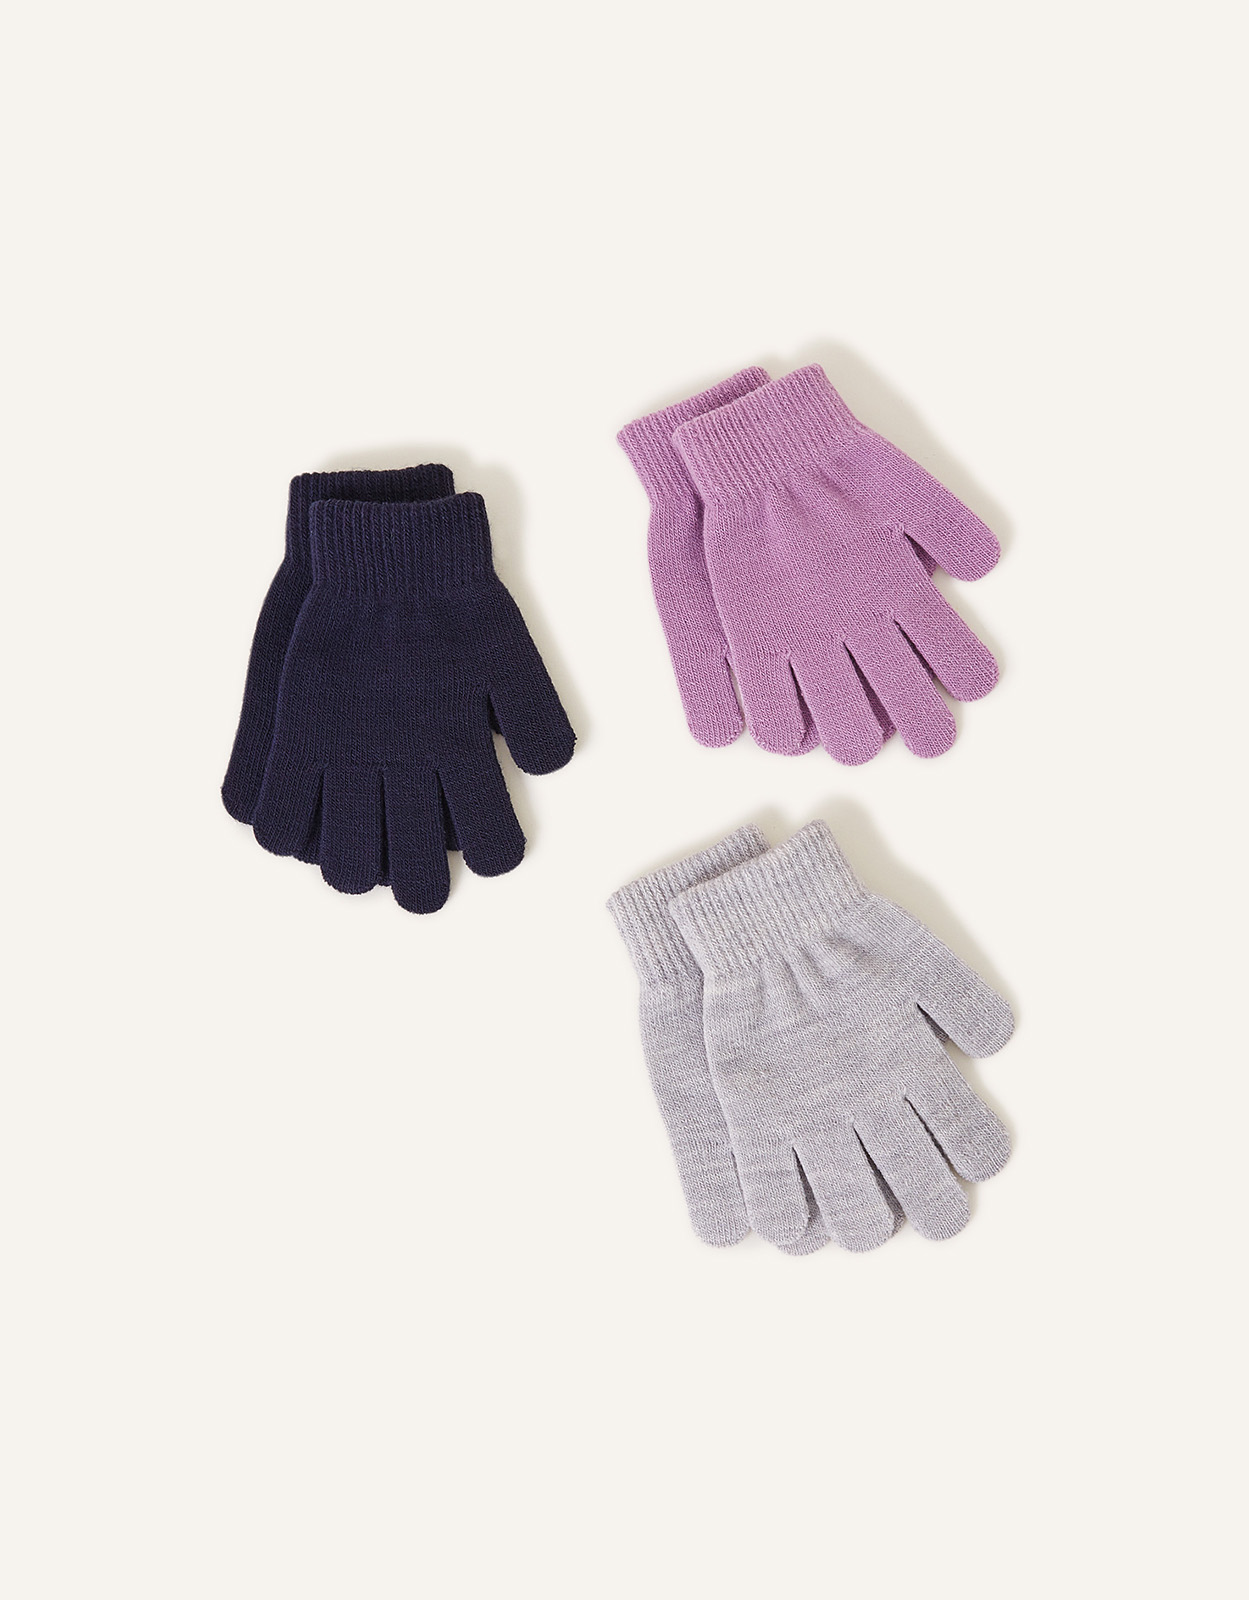 Accessorize Girl's Girls Gloves Set of Three Multi, Size: 6-8 yrs